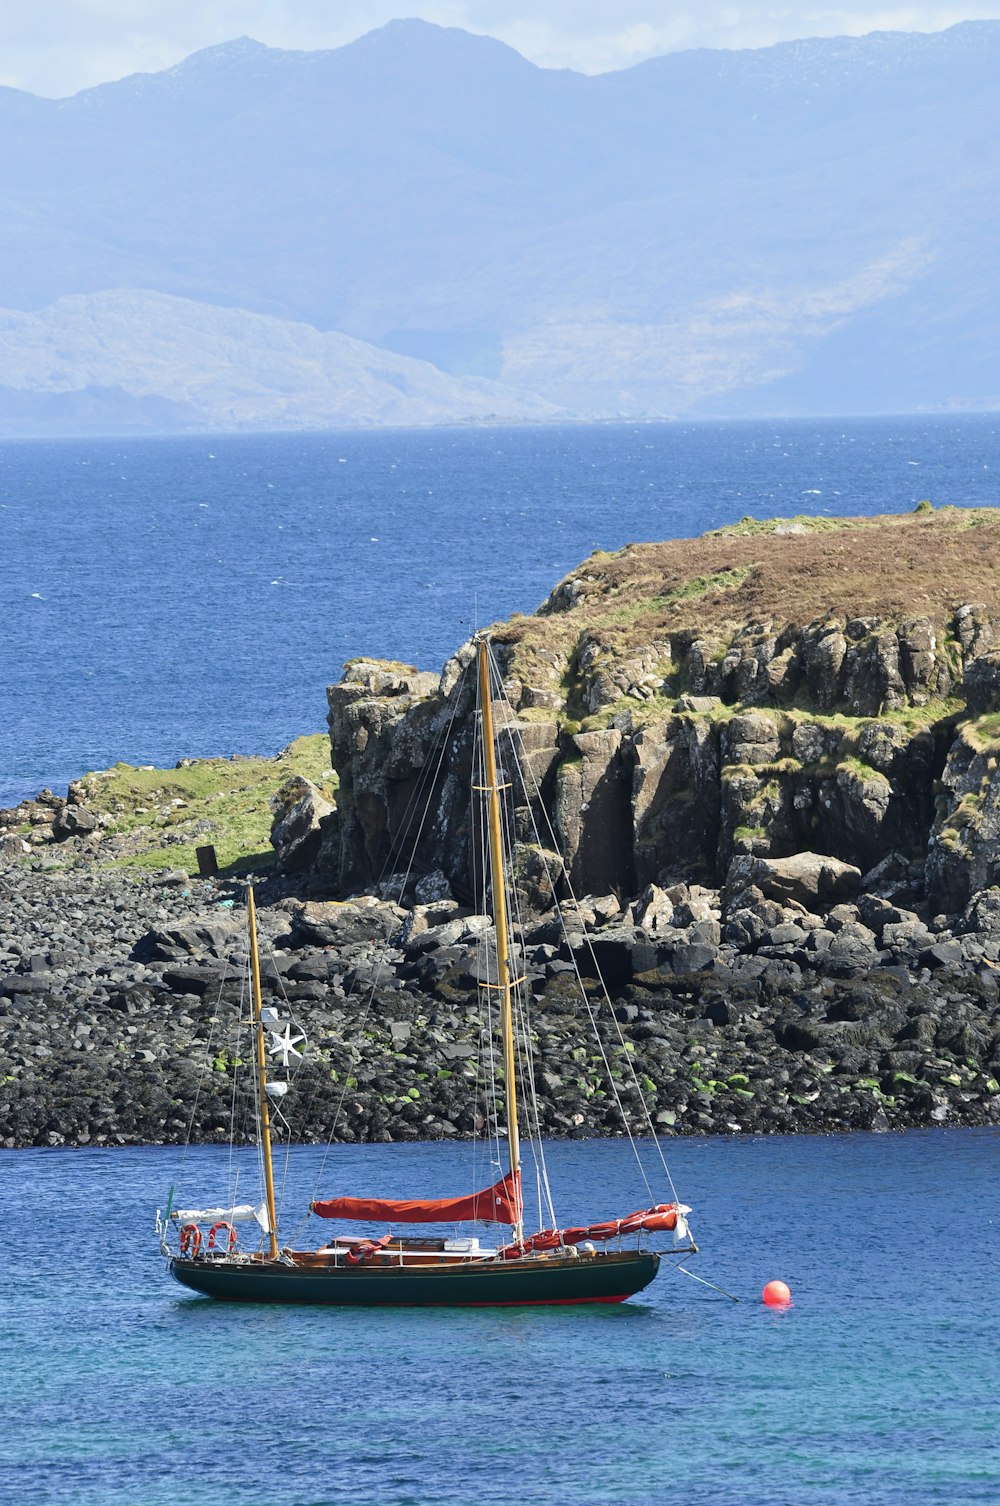 a sailboat in the water near a rocky shore